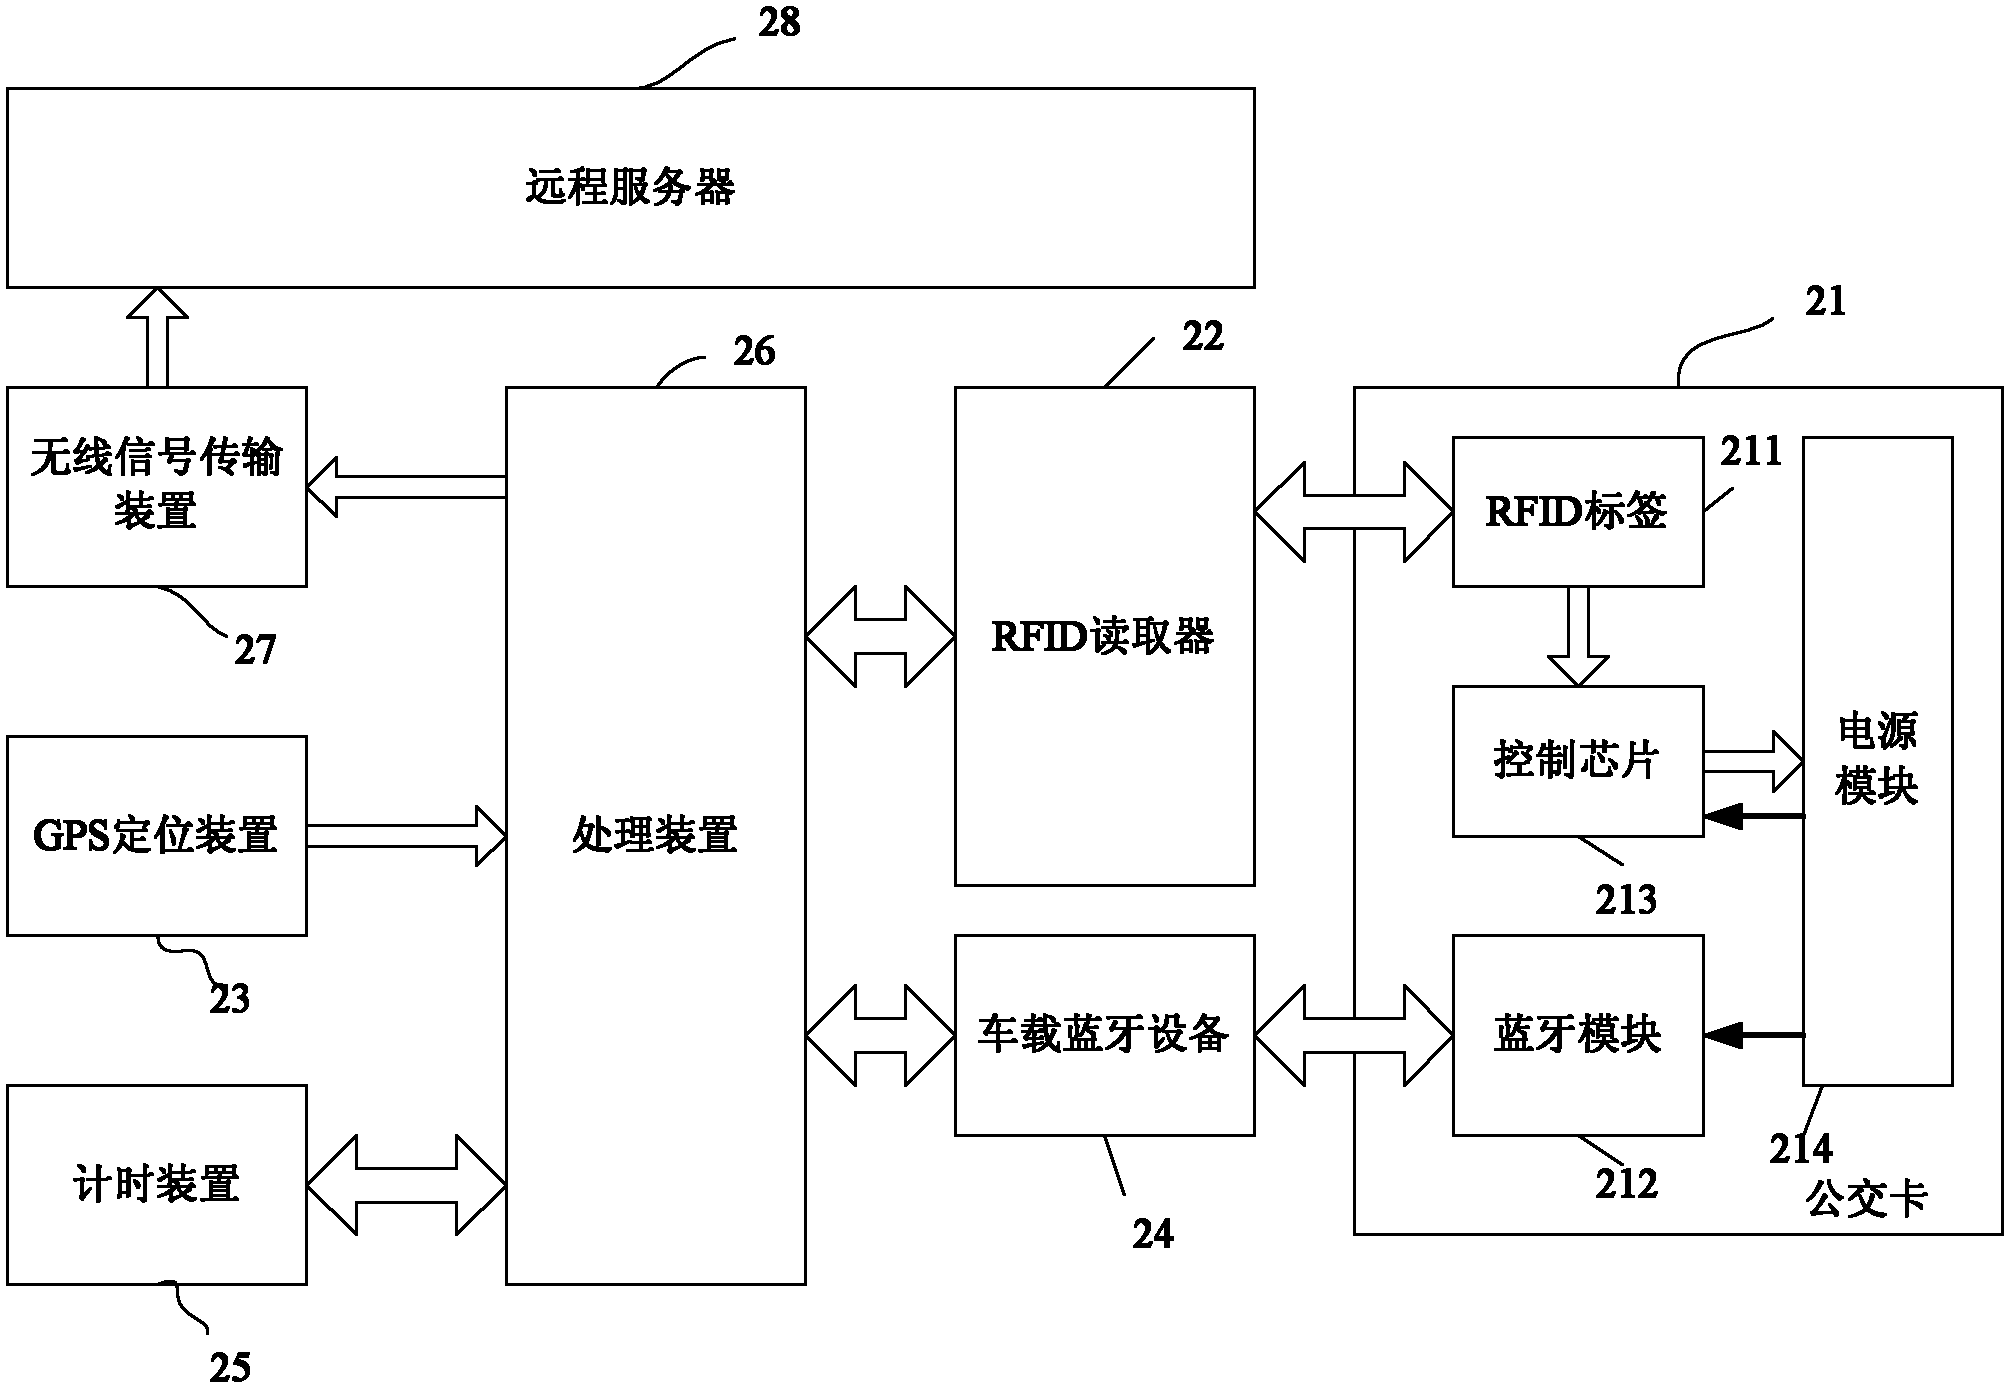 Method and system for automatic charging of bus in sections